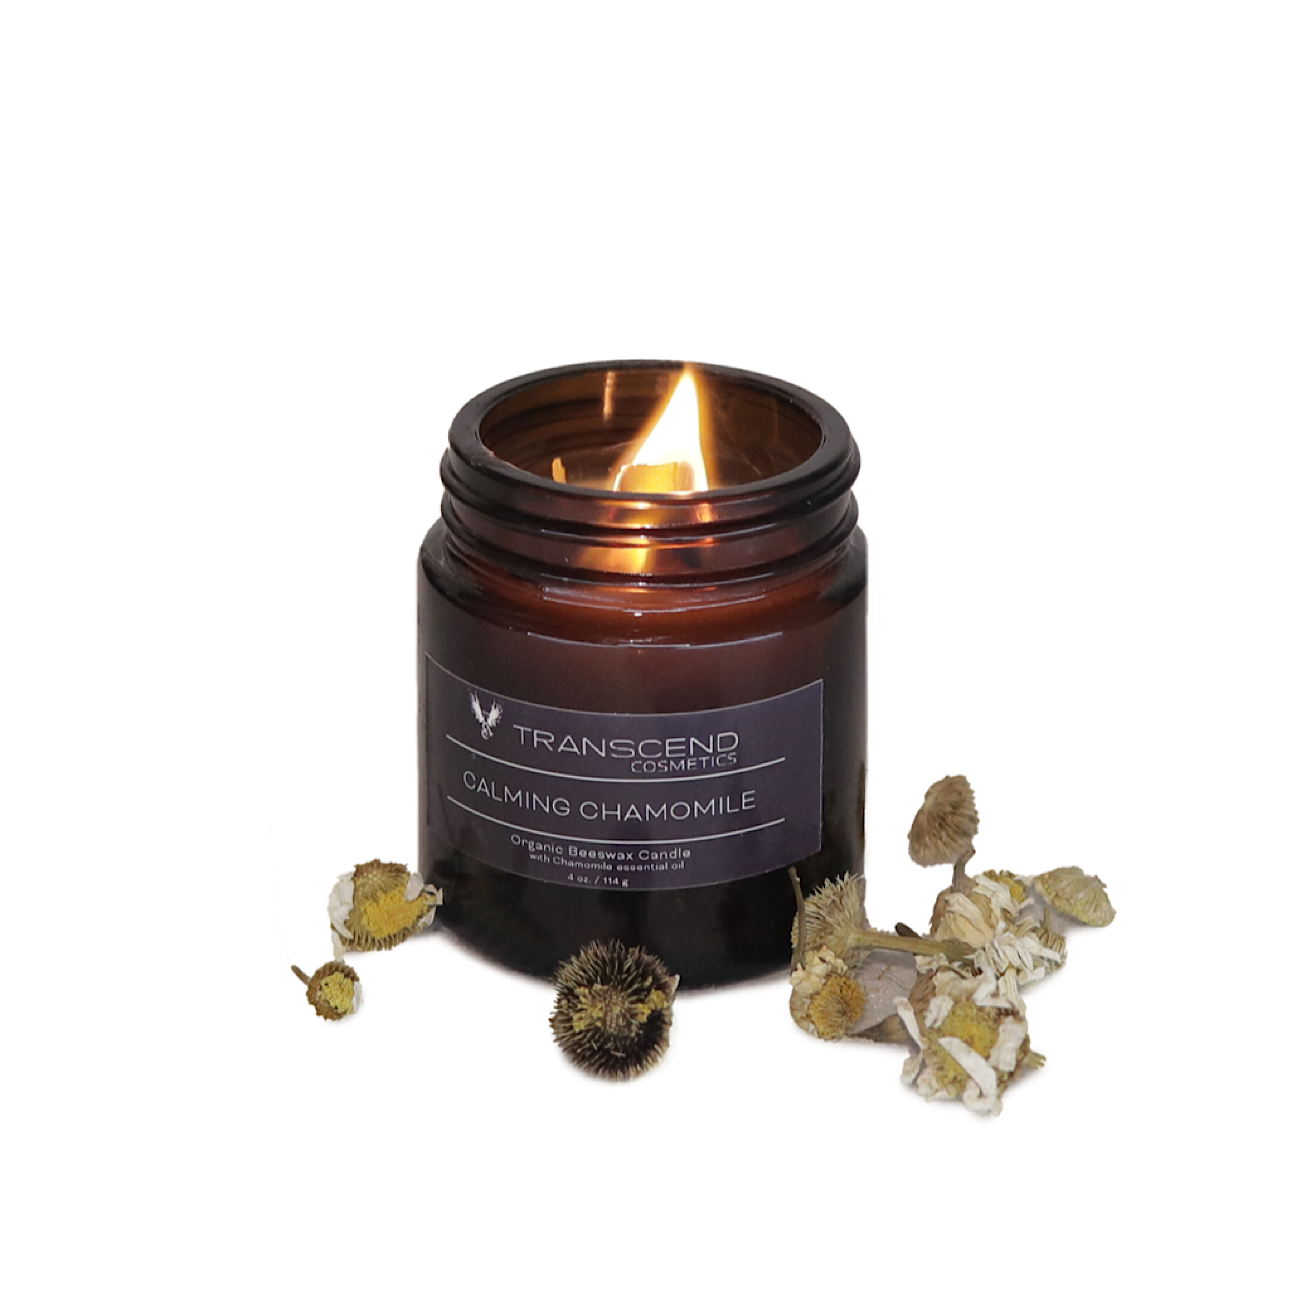 calming chamomile, chamomile candle, chamomile scented candle, organic beeswax candle with chamomile essential oil, calming chamomile beeswax candle with chamomile essential oil, organic candle, transcend cosmetics candle, transcend cosmetics, transcend cosmetics beeswax candle,essential oil, essential oil candle, candle, beeswax candle